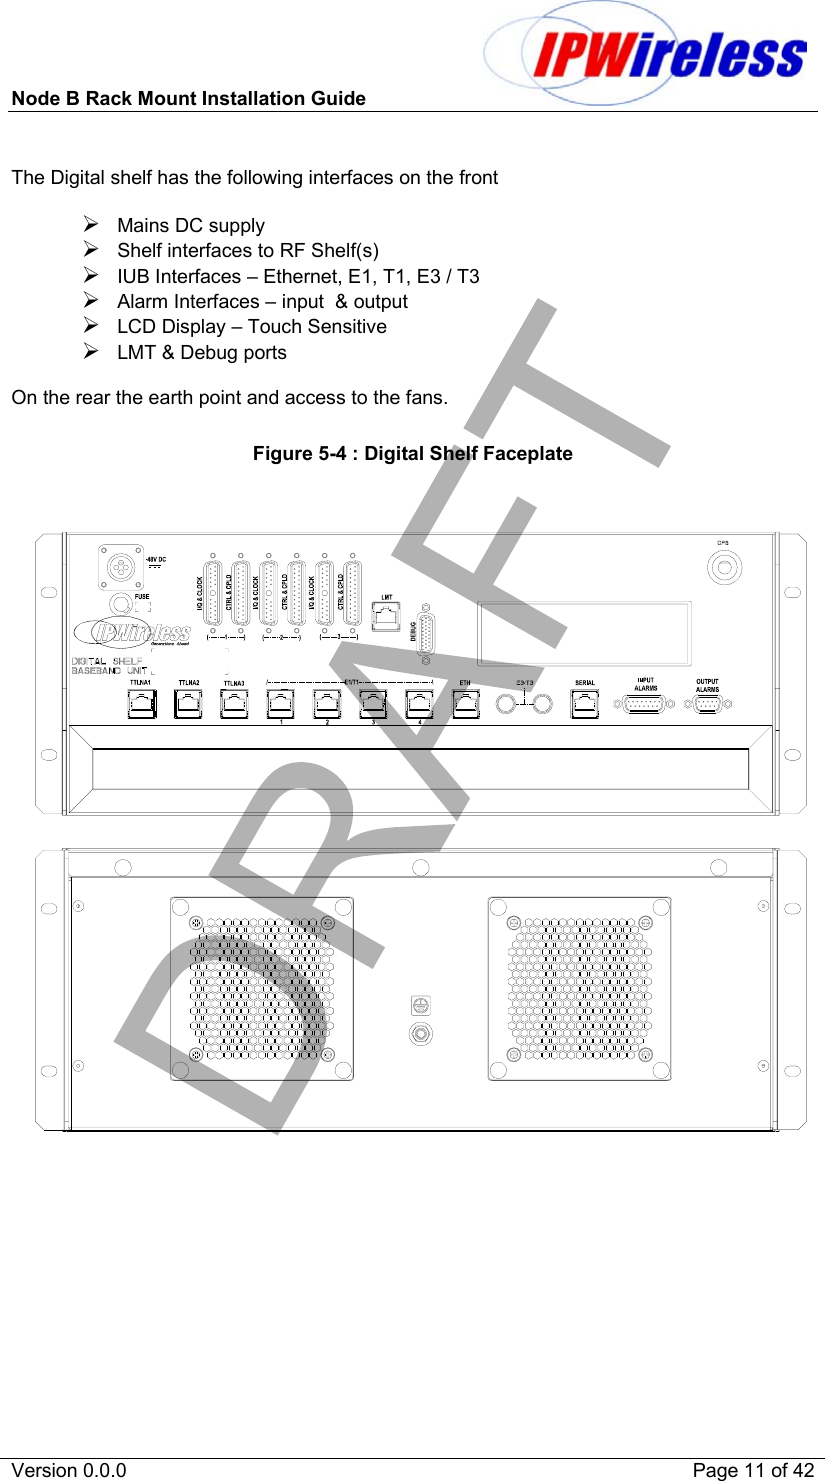 Node B Rack Mount Installation Guide                           Version 0.0.0    Page 11 of 42  The Digital shelf has the following interfaces on the front   Mains DC supply  Shelf interfaces to RF Shelf(s)  IUB Interfaces – Ethernet, E1, T1, E3 / T3  Alarm Interfaces – input  &amp; output  LCD Display – Touch Sensitive  LMT &amp; Debug ports  On the rear the earth point and access to the fans.  Figure 5-4 : Digital Shelf Faceplate 